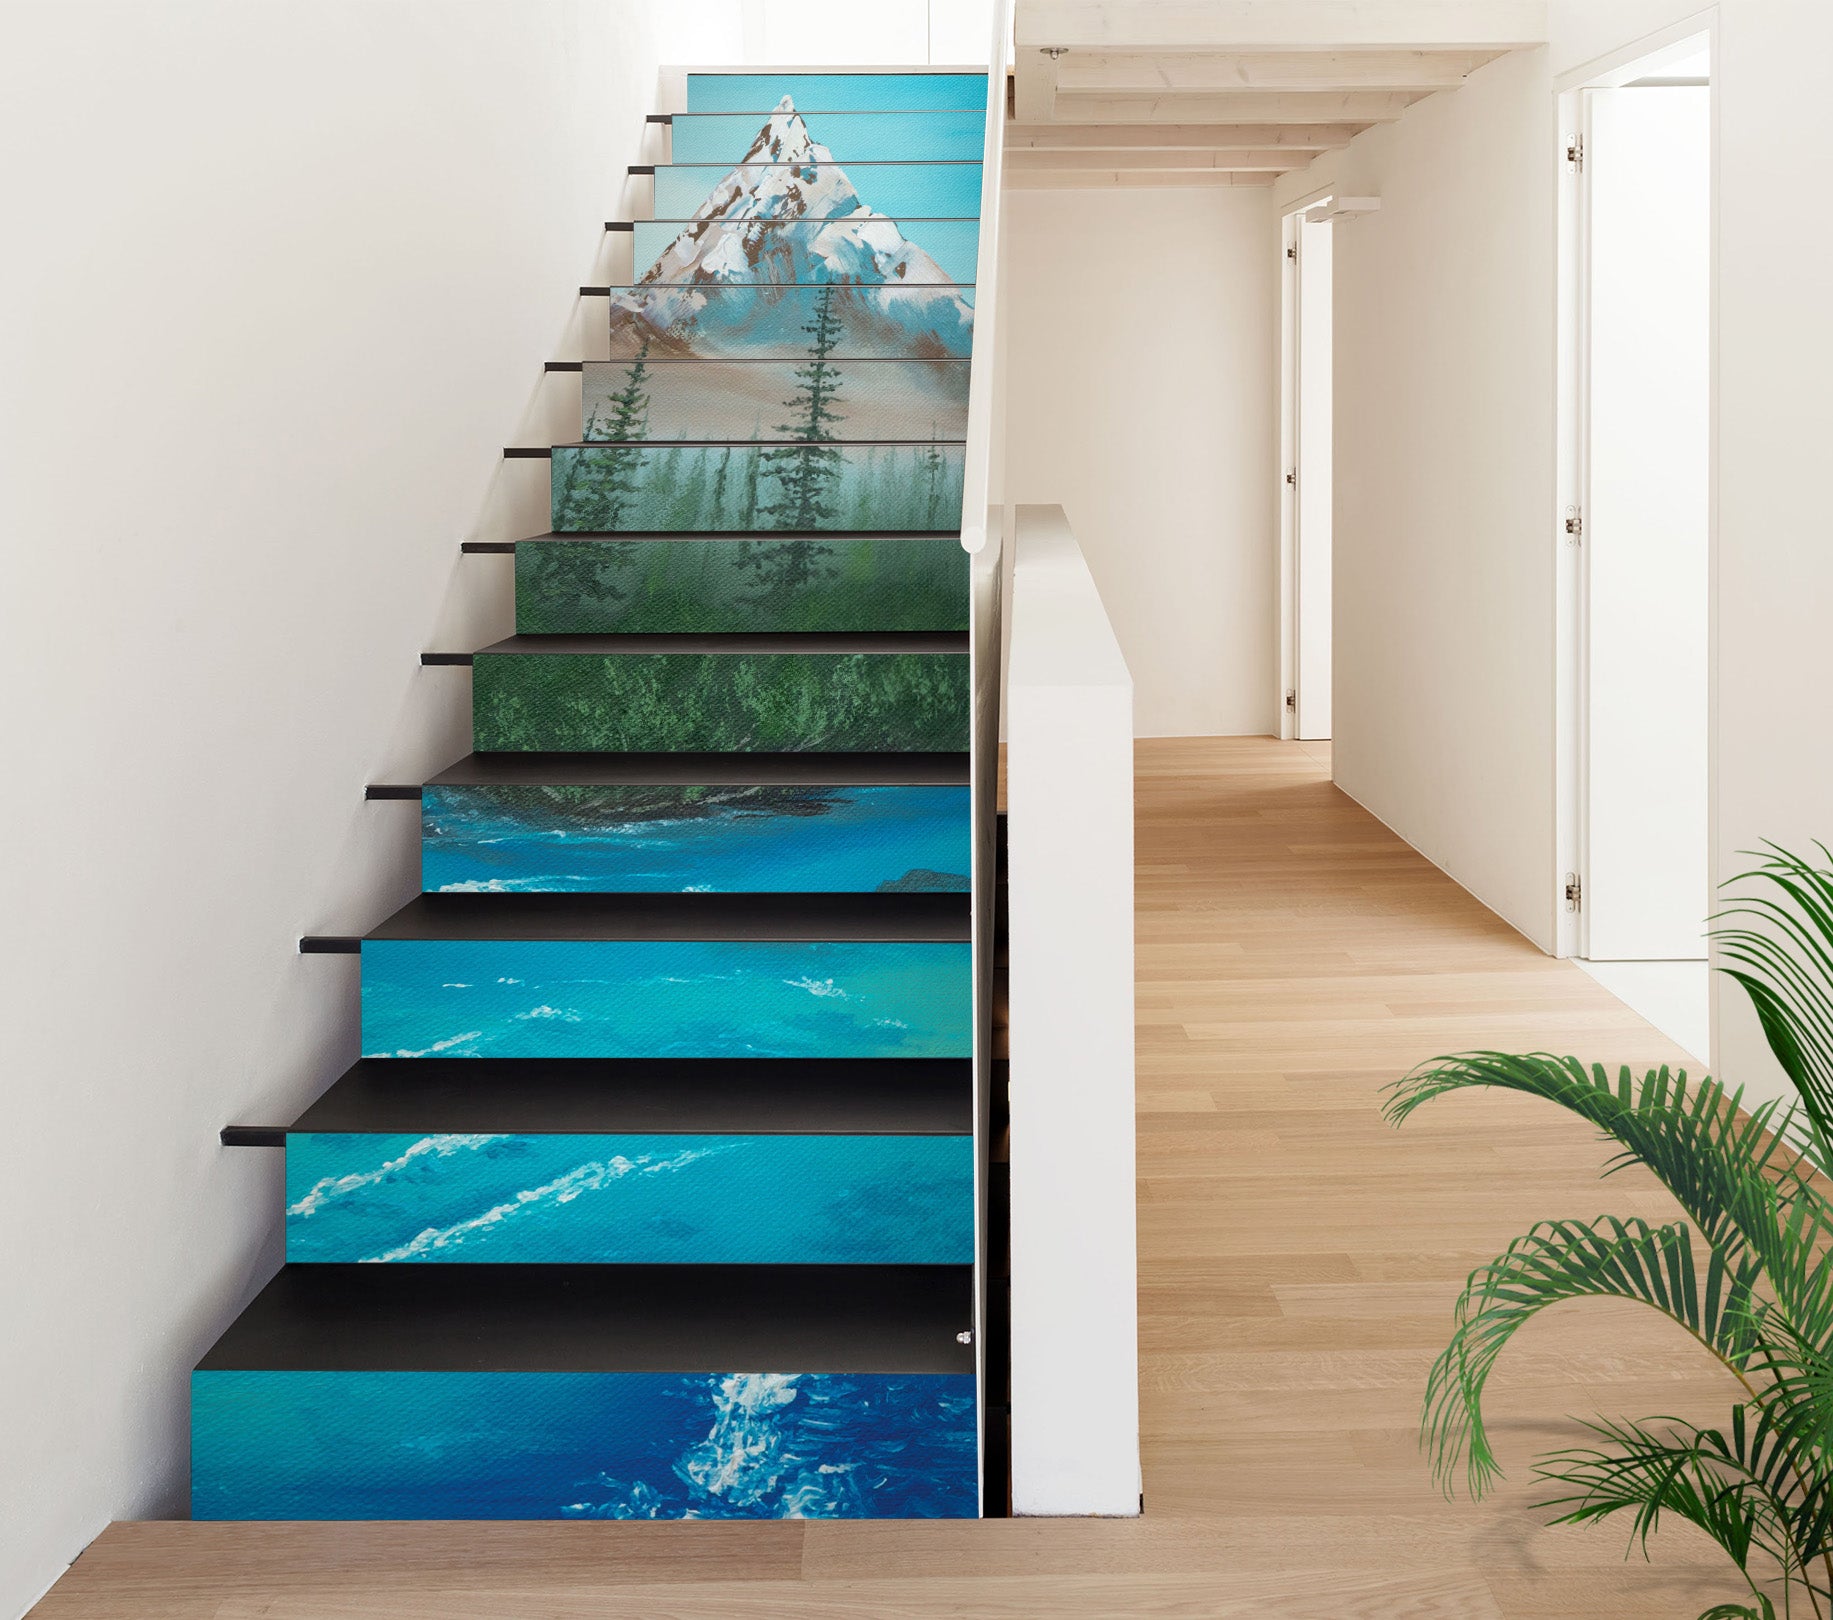 3D Snow Mountain River Forest 9479 Marina Zotova Stair Risers